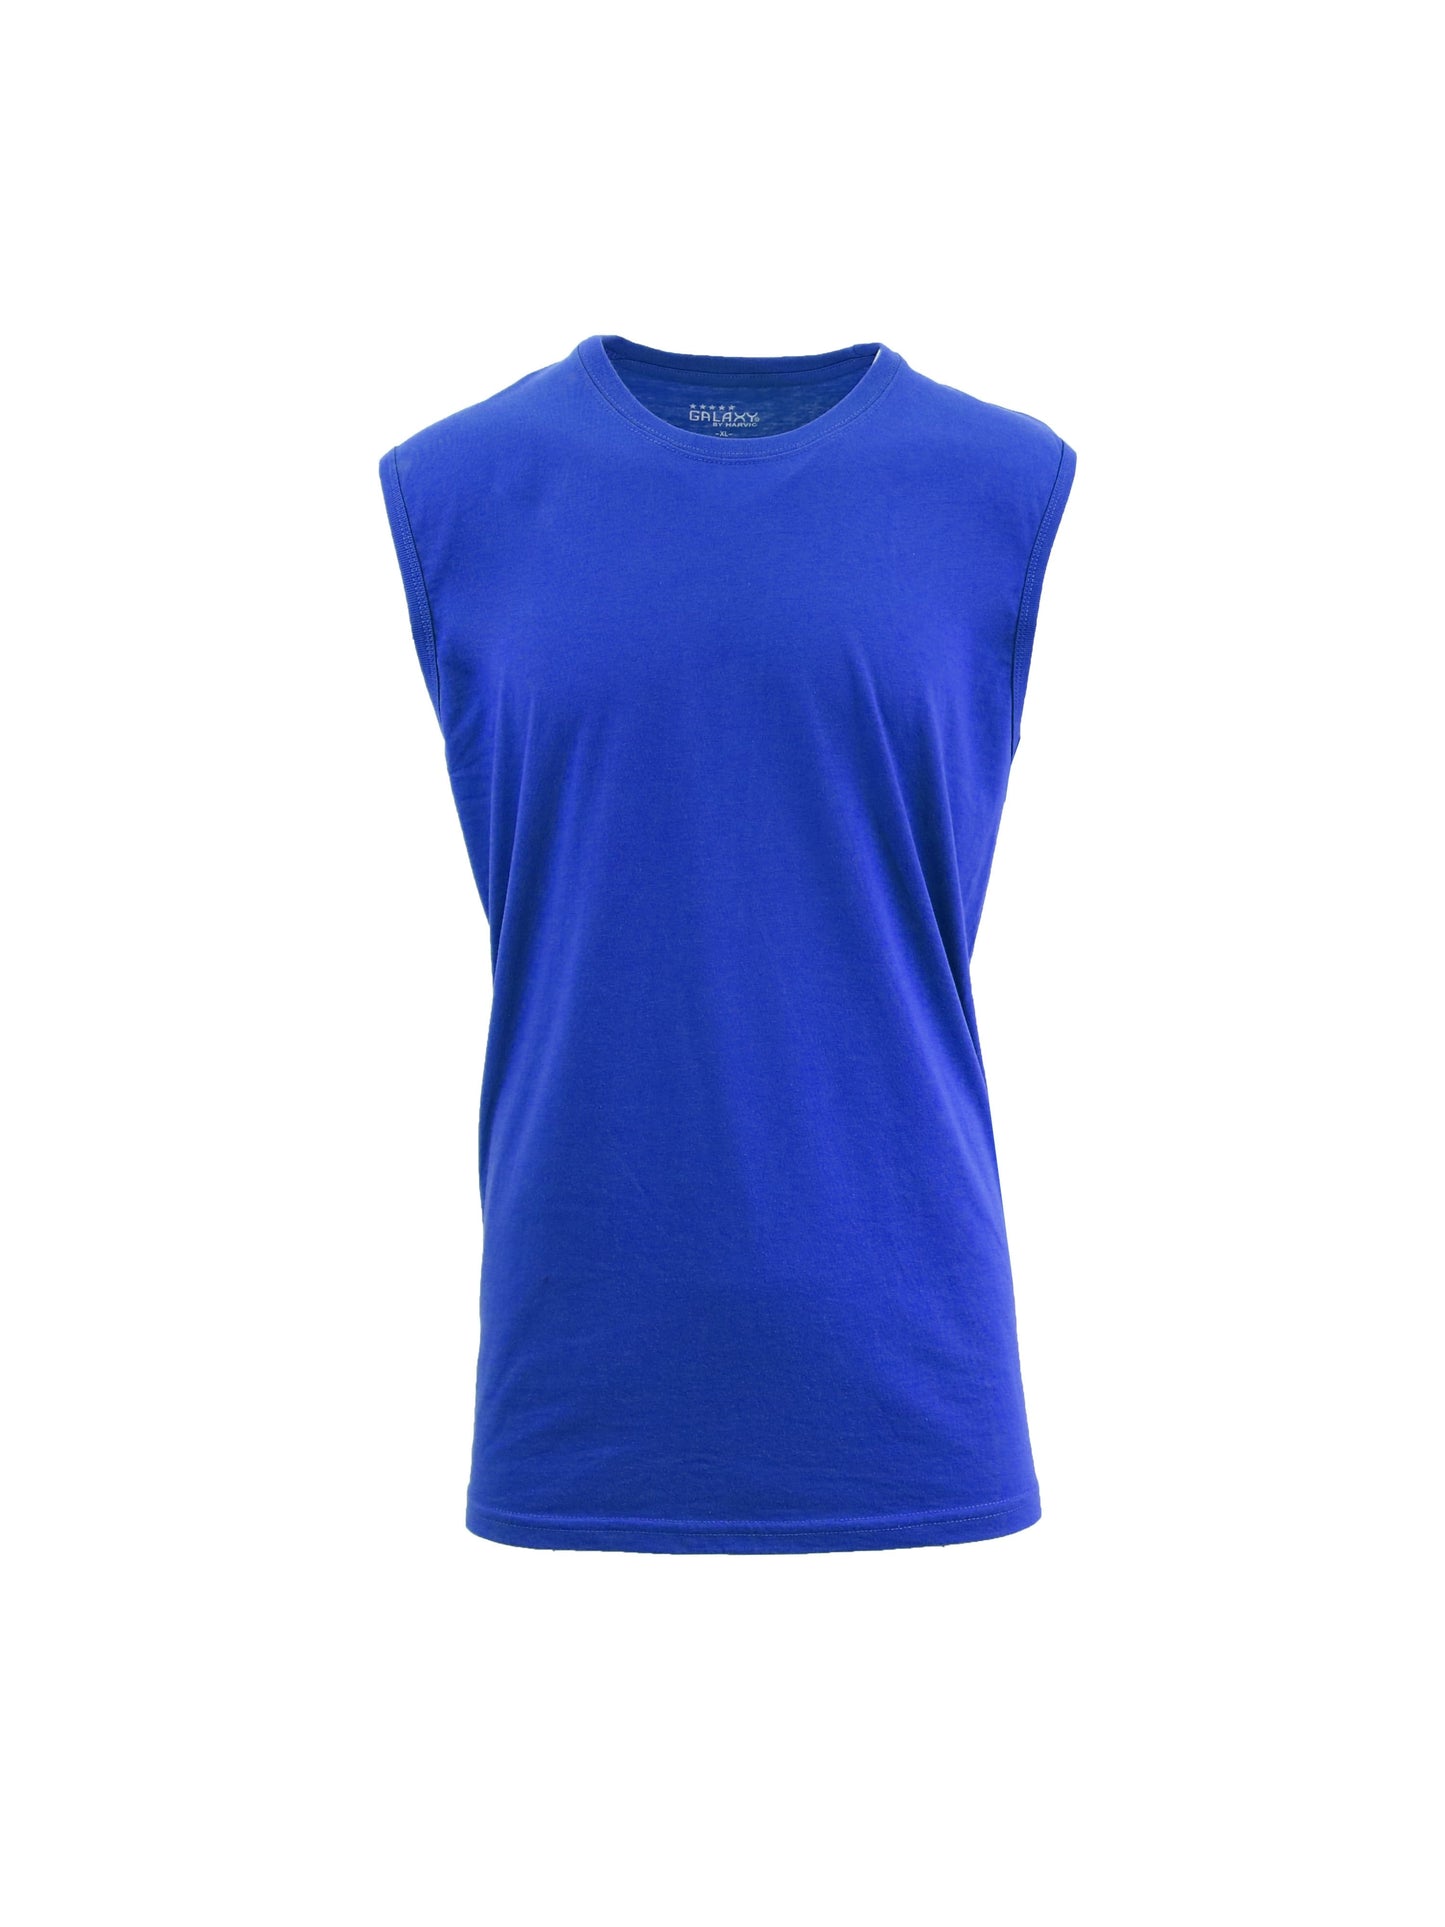 Men's Muscle Tank T-Shirt - GalaxybyHarvic